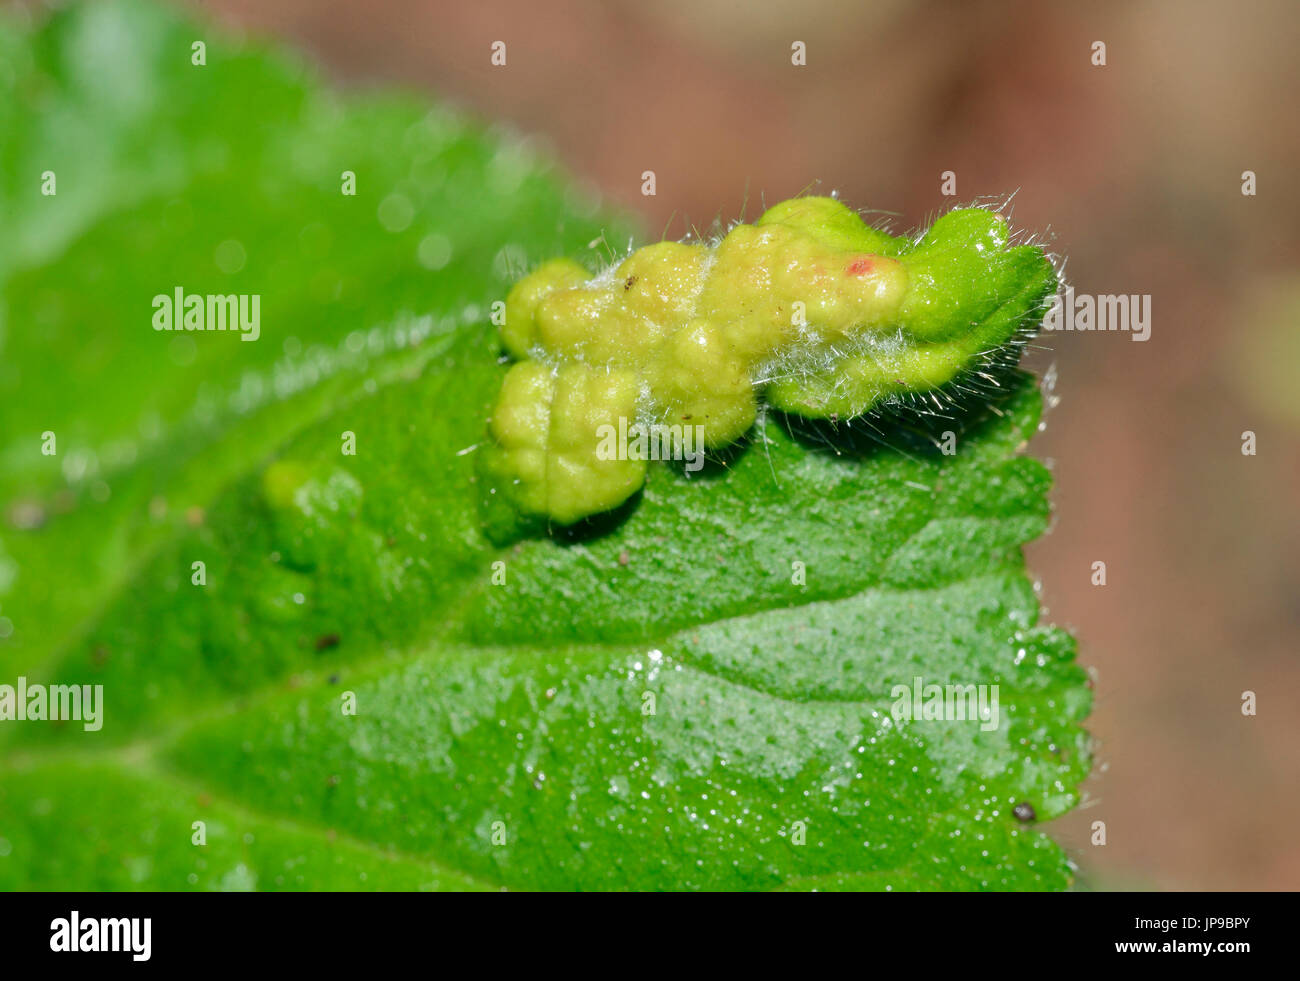 Gall caused by Gall Mite - Cecidophyes nudus on leaf of Herb Bennet or Wood Avens leaf - Geum urbanum Stock Photo